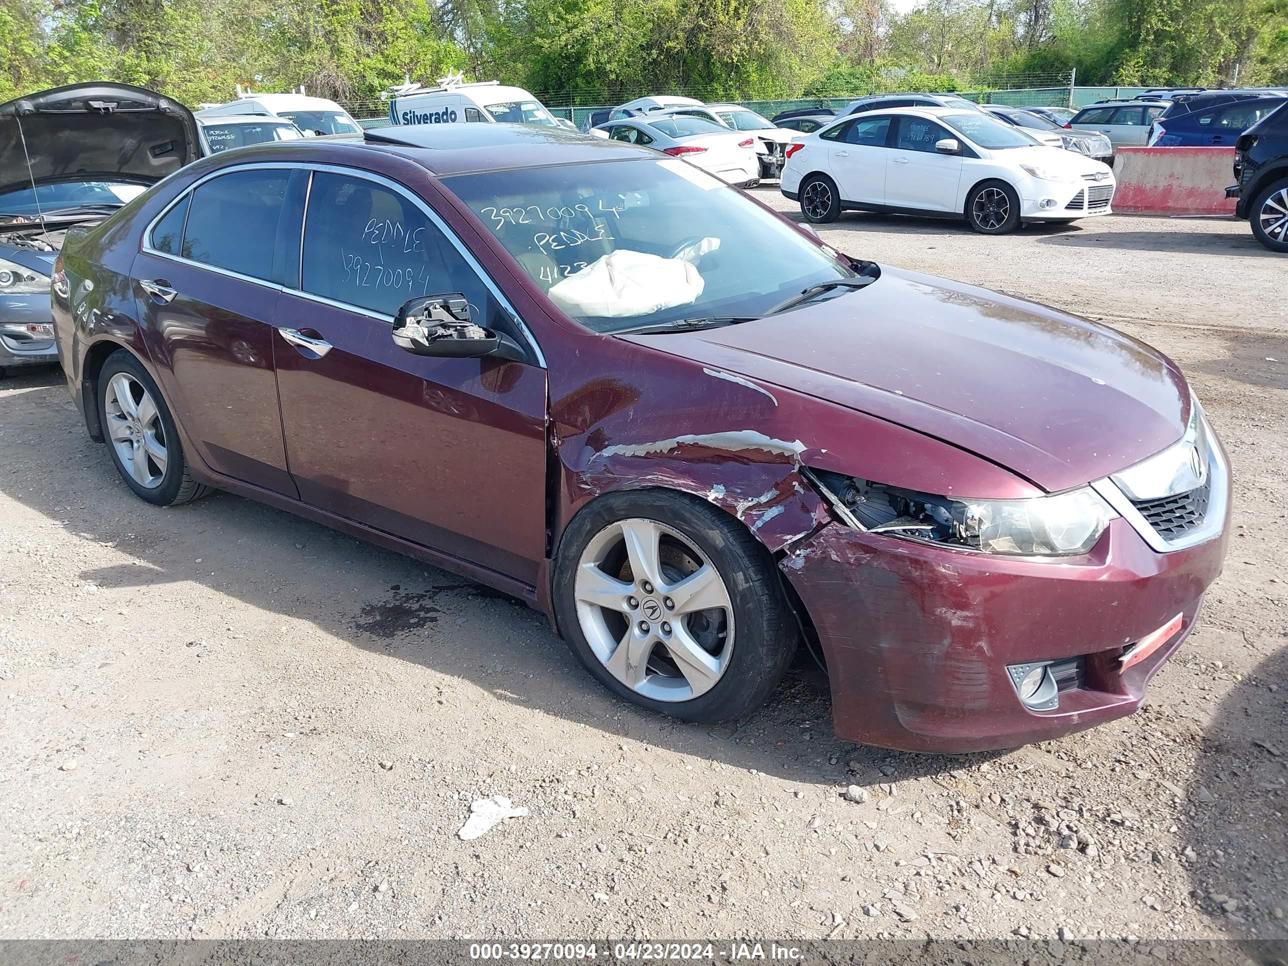 vin: JH4CU26679C003531 JH4CU26679C003531 2009 acura tsx 2400 for Sale in 21226, 3131 Hawkins Point Road, Baltimore, Maryland, USA